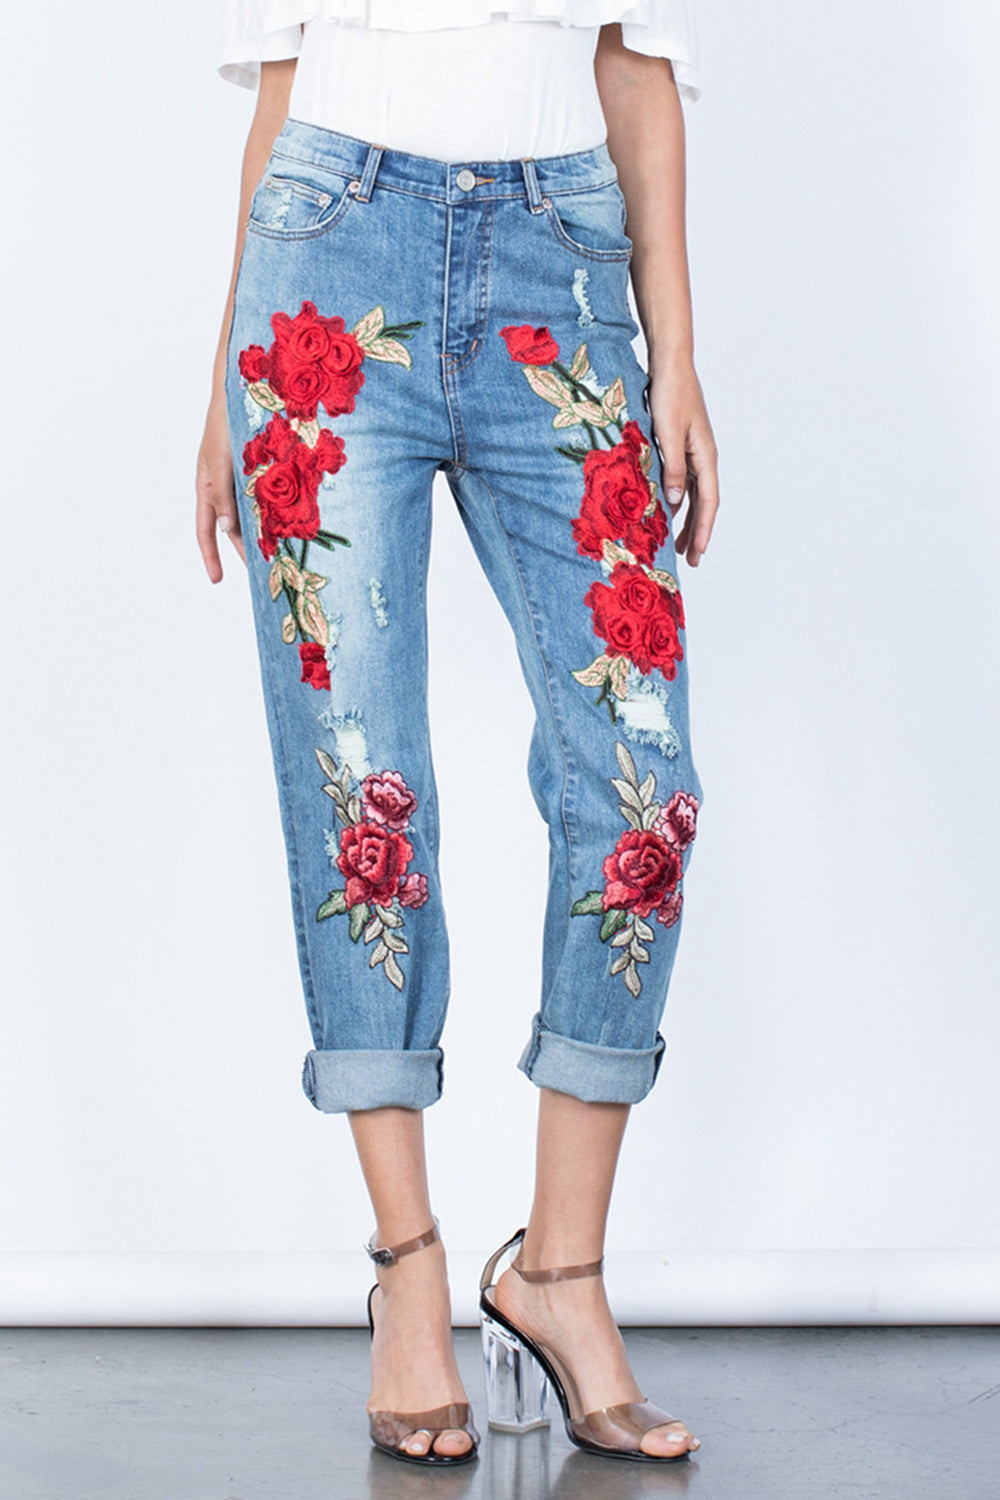 Full Size Flower Embroidery Buttoned JeansStraight Leg Jeans